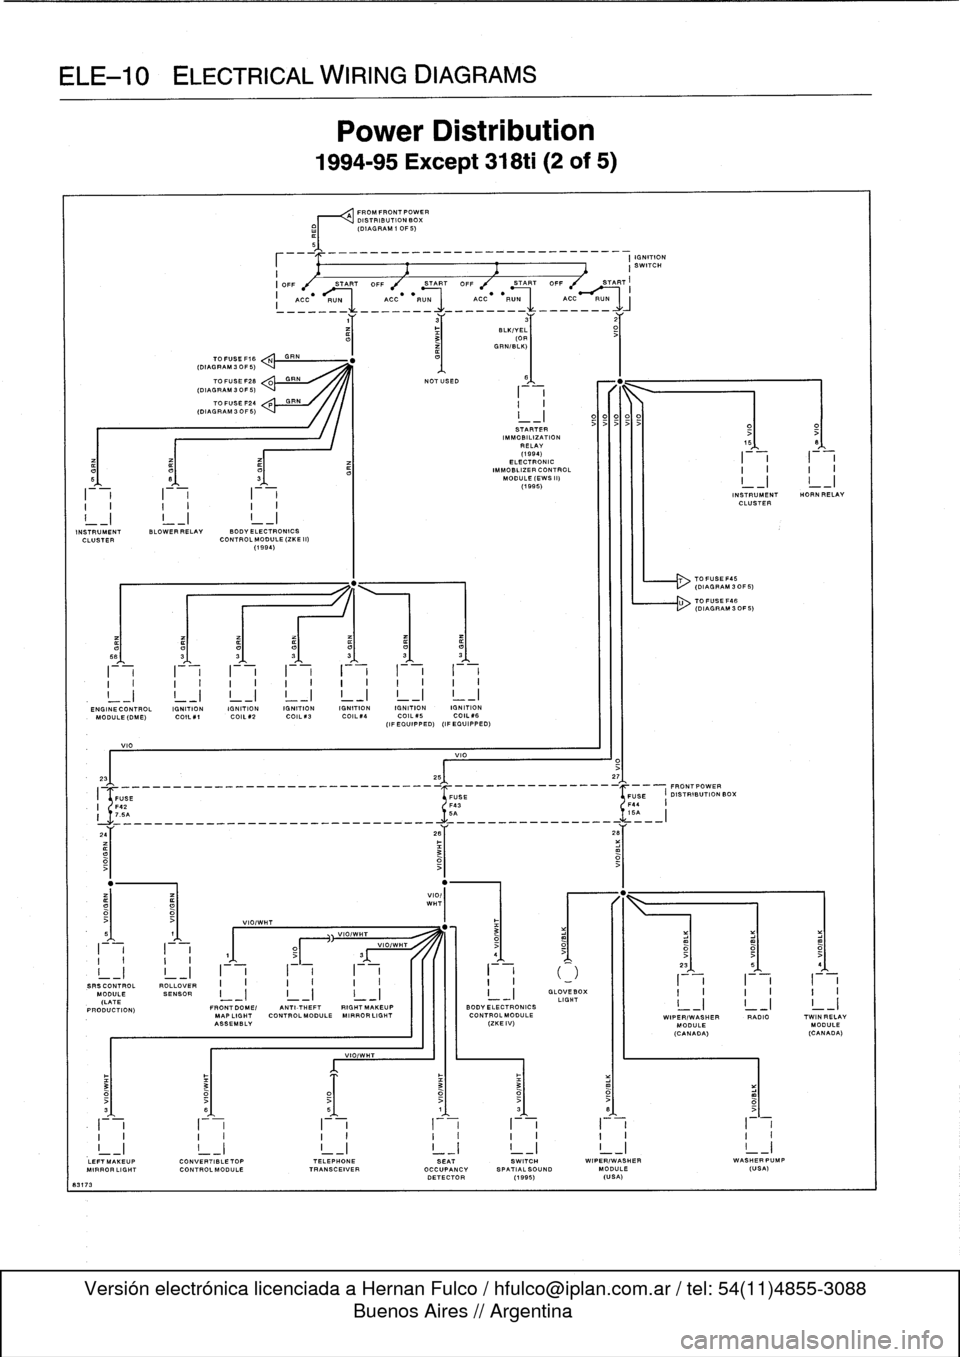 BMW M3 1994 E36 Owners Manual 
lICAL
WIRING
DIAG

Power
Di
:

1994-95
Excep

~A
FROMFRONTPOWER
I

	

~+
DISTRIBUTION
BOX
(DIAGRAM
10F5)

	

_

------
~~
I
5
IGNITION

BLKIVEL
O

	

(OR
GFN/BLK)TO
FUSE
F16

	

N
(DIAGRAM
3
OF
5)
TO